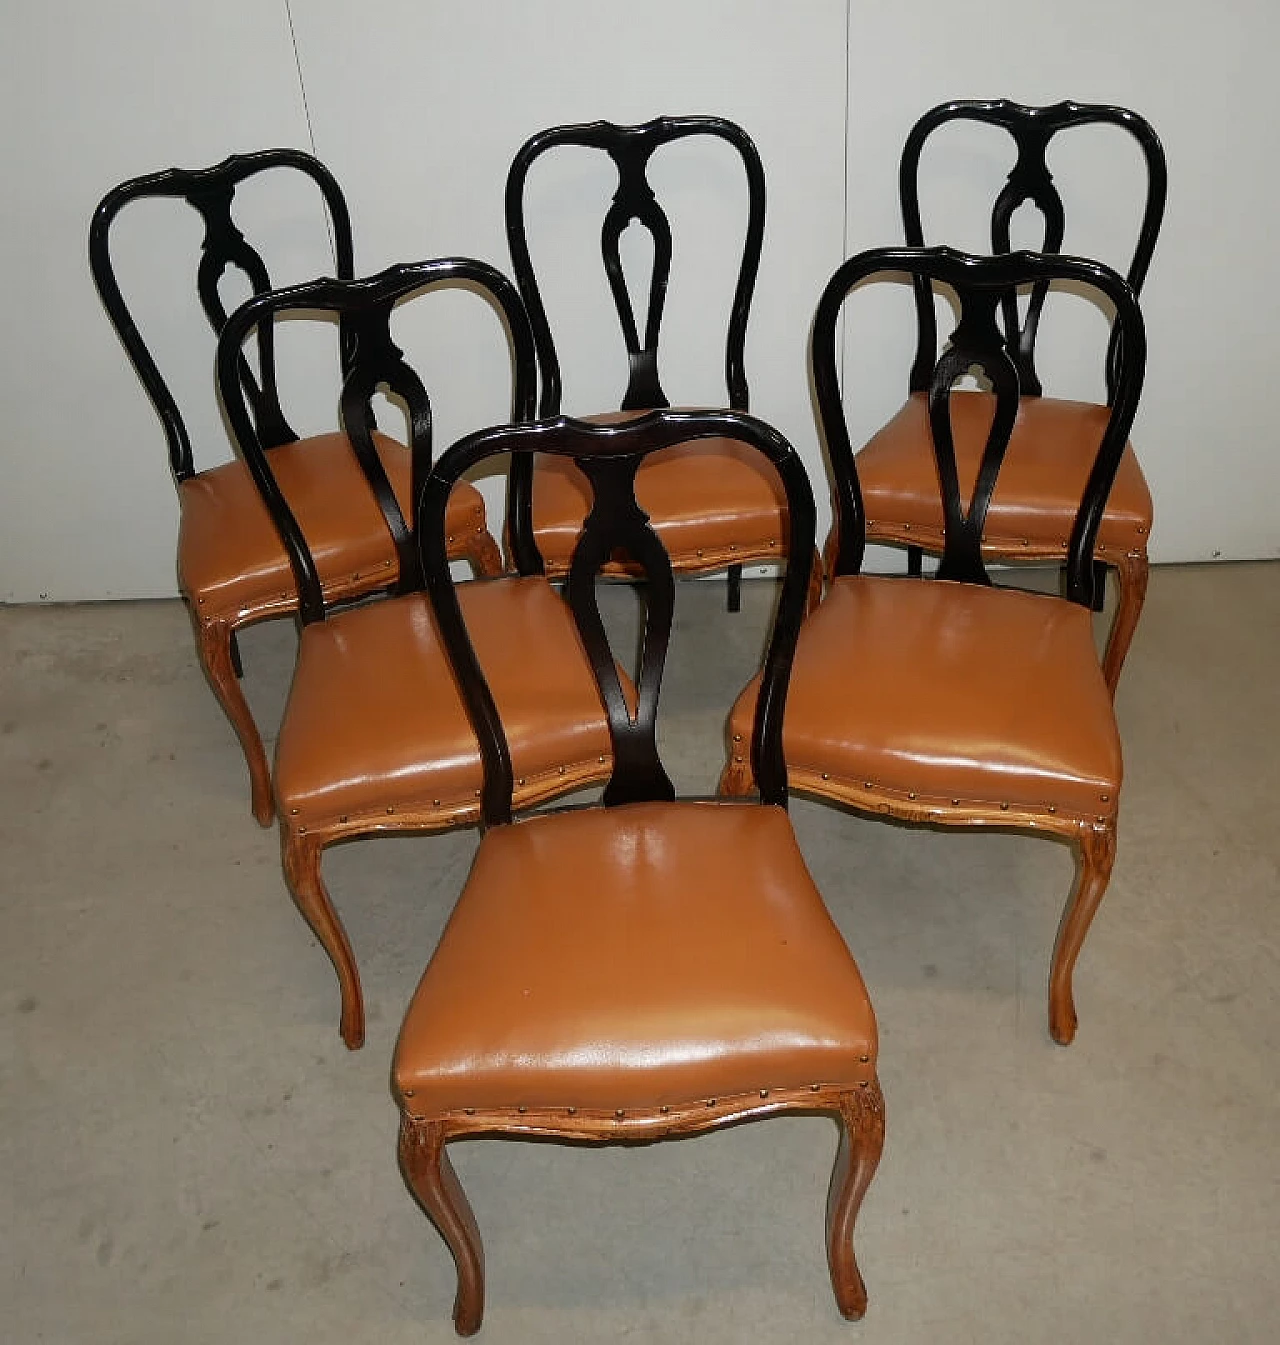 6 Chippendale style wooden chairs, 1950s 13